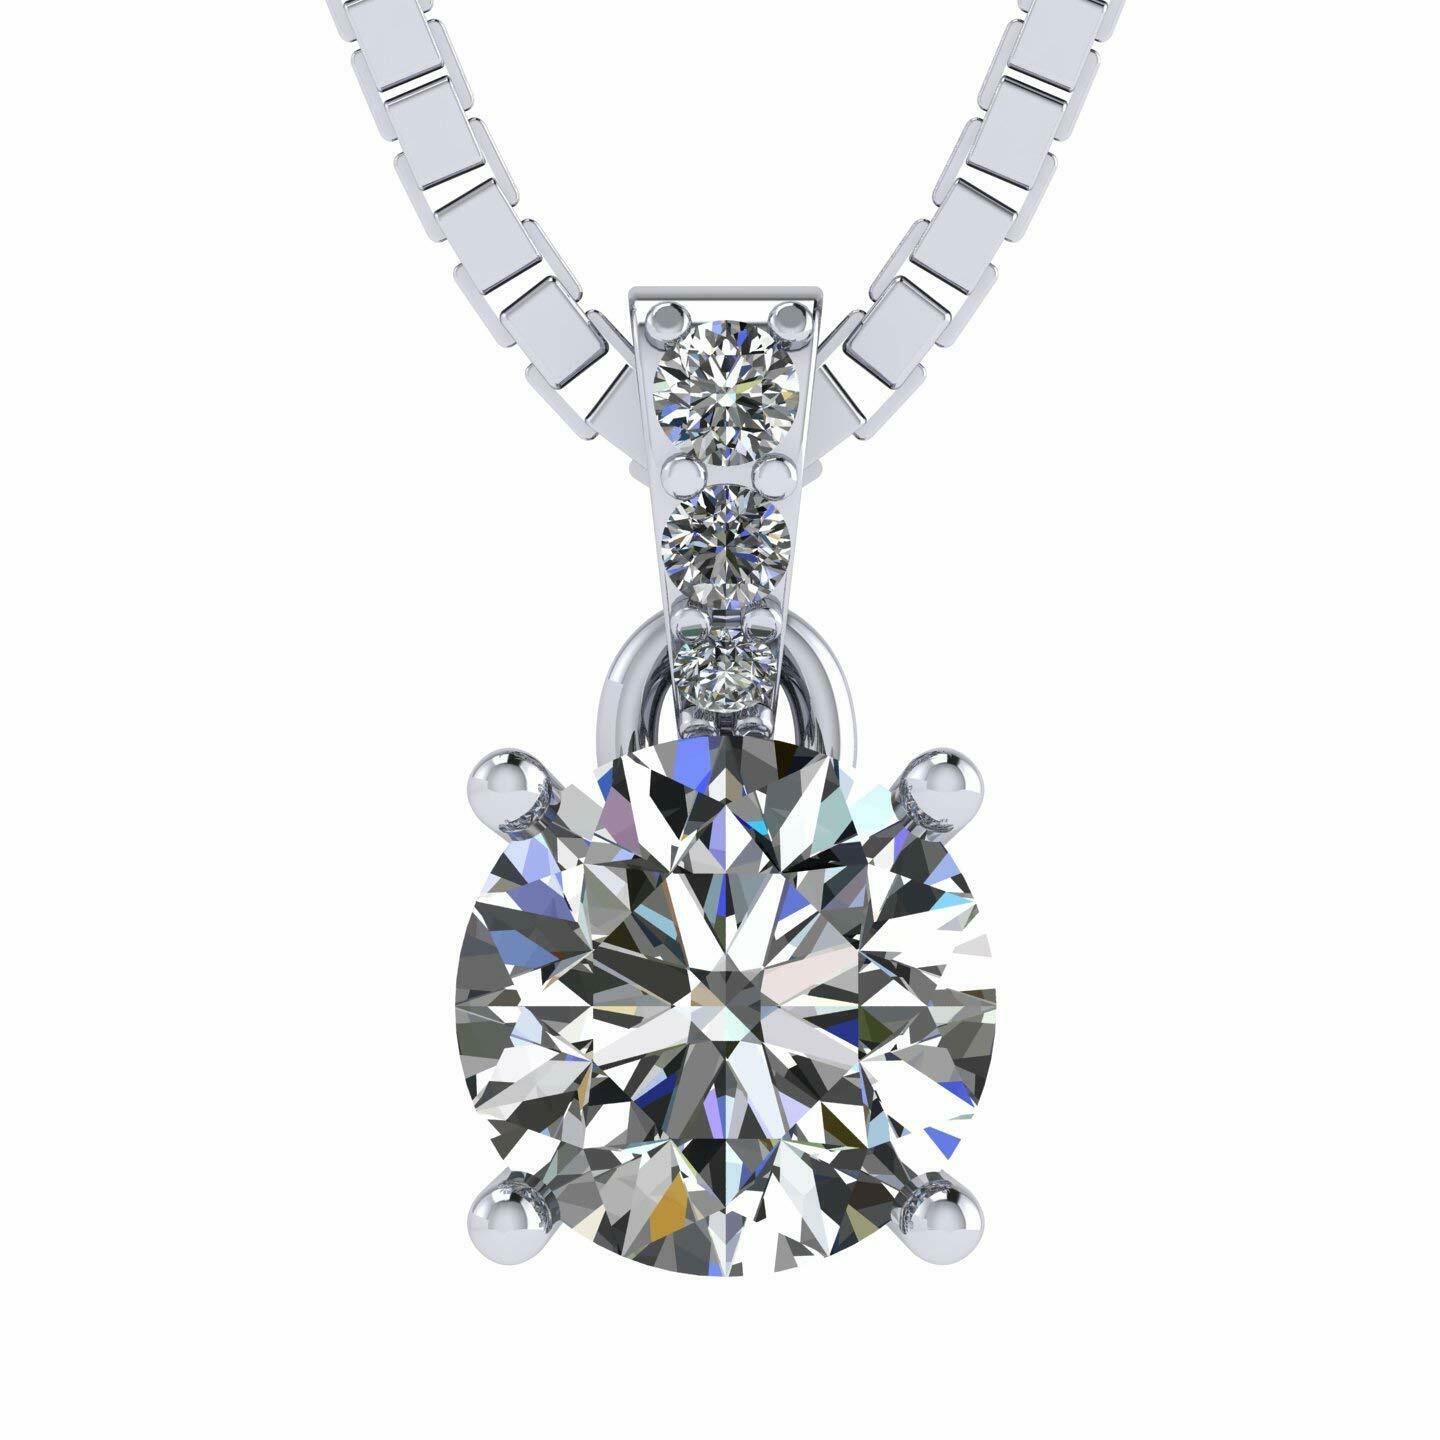  "Captivating 1.00ct Simulated Diamond Necklace - Sterling Silver & Zirconia"